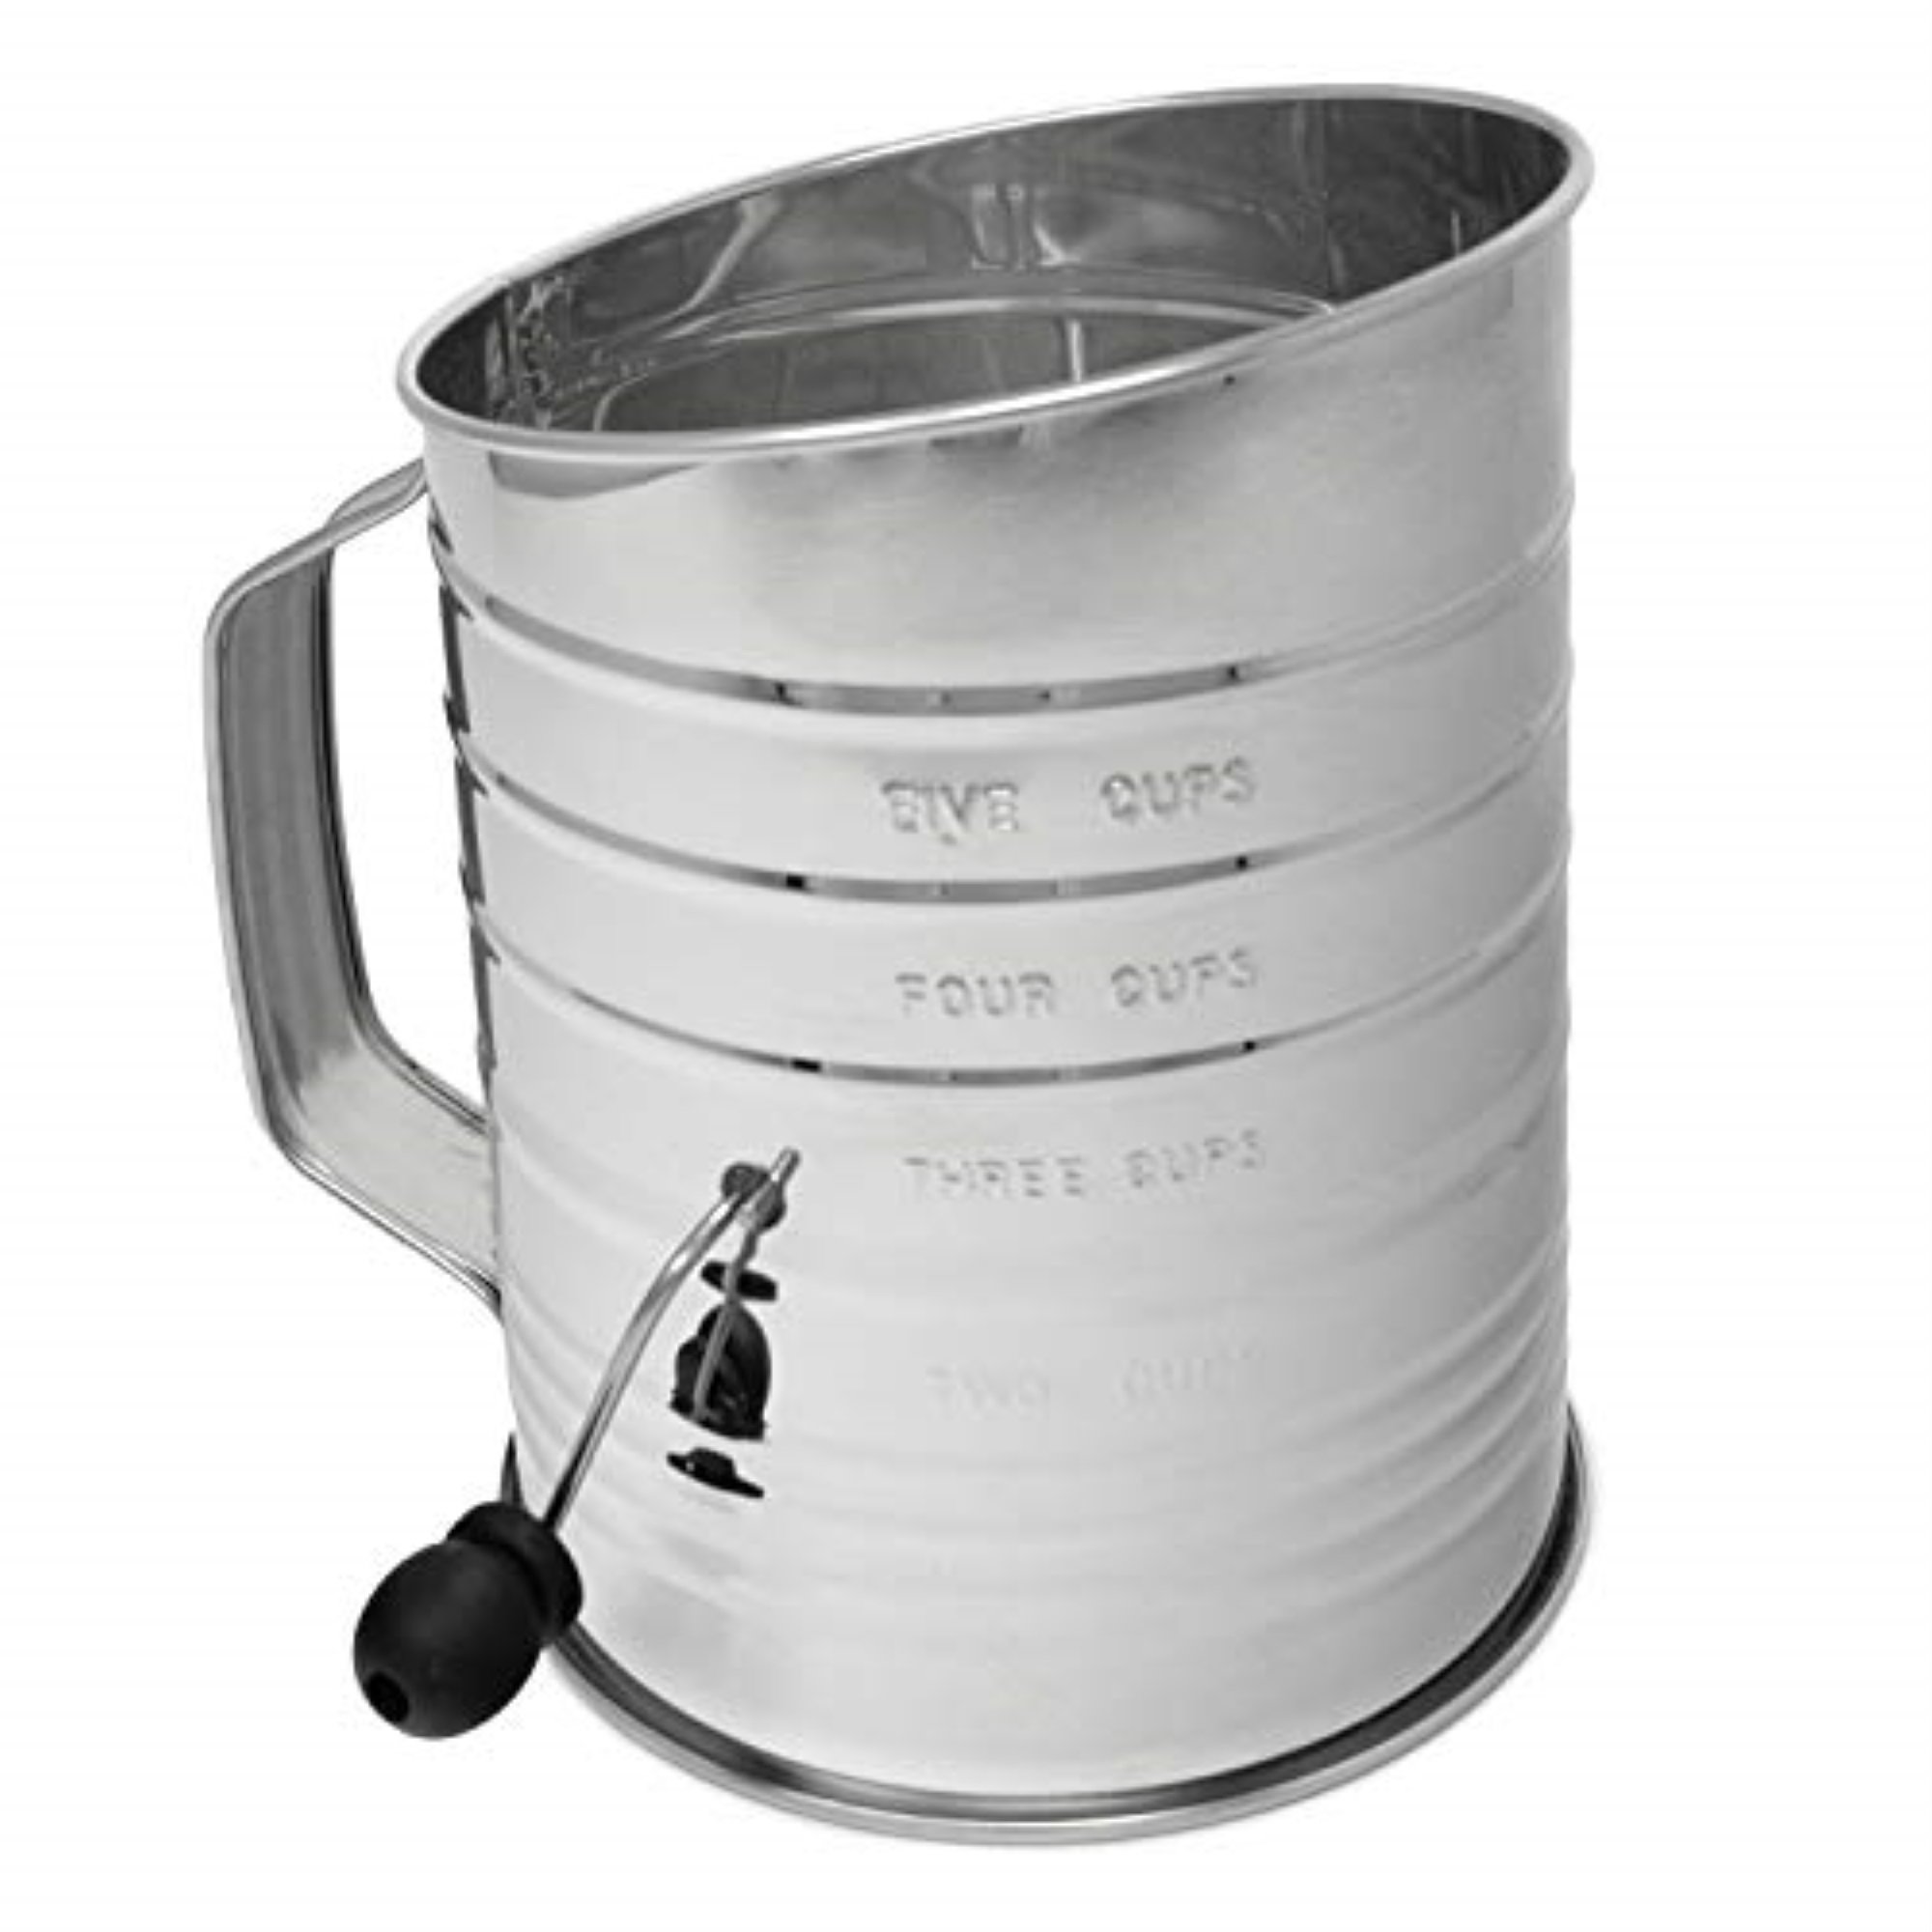 Norpro 137 5-Cup Stainless Steel Crank Flour Sifter